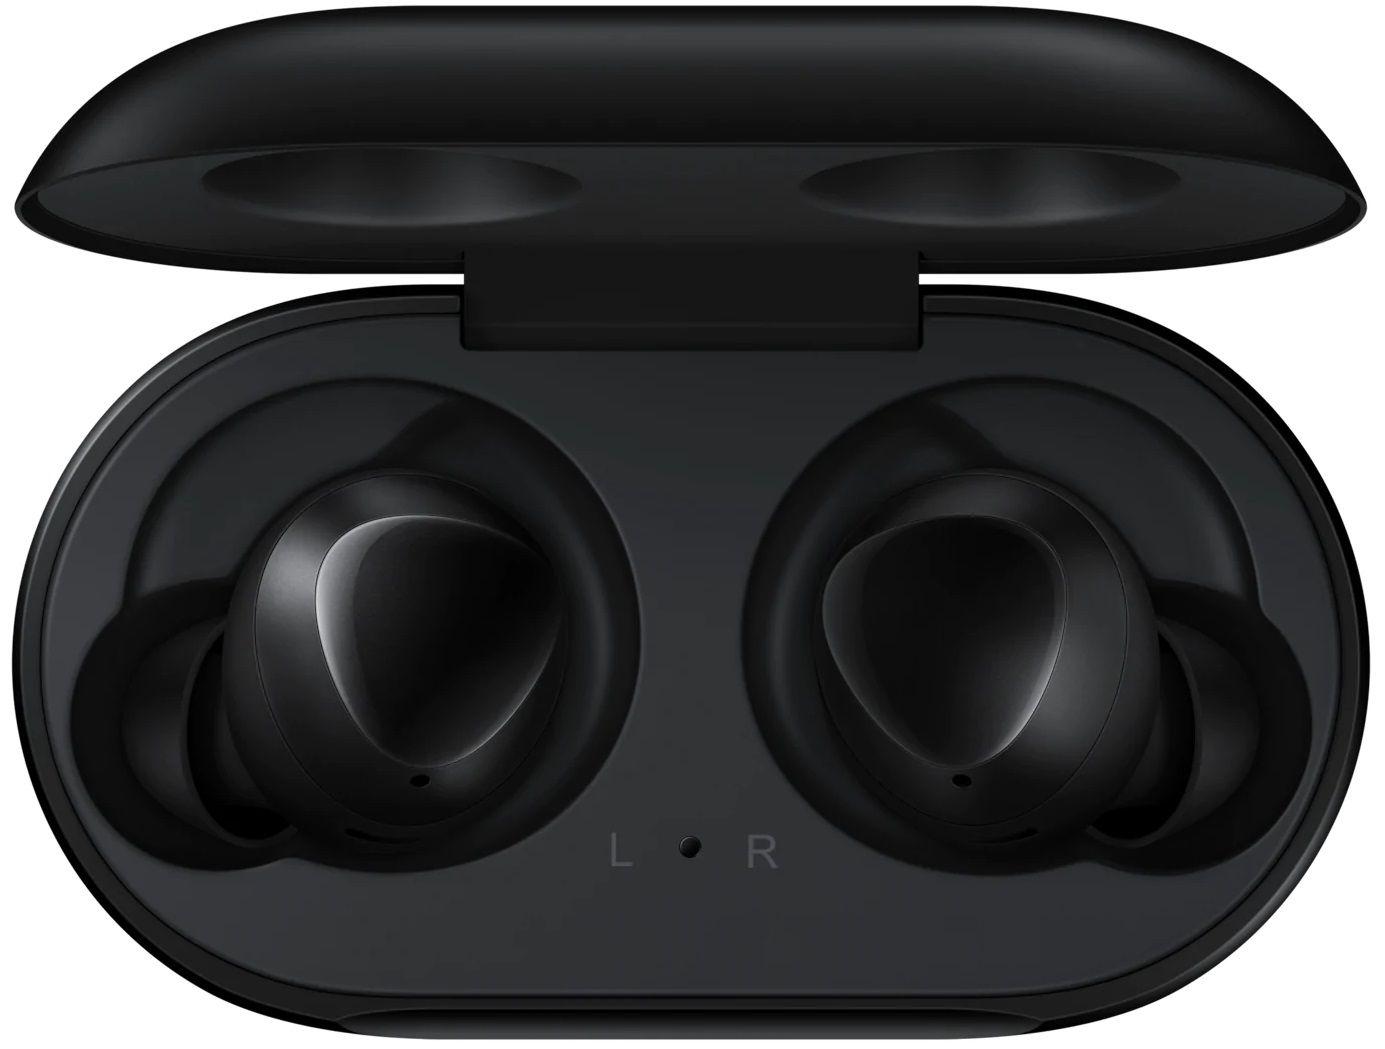 Wireless Bluetooth Headphones Buds black with induction charging